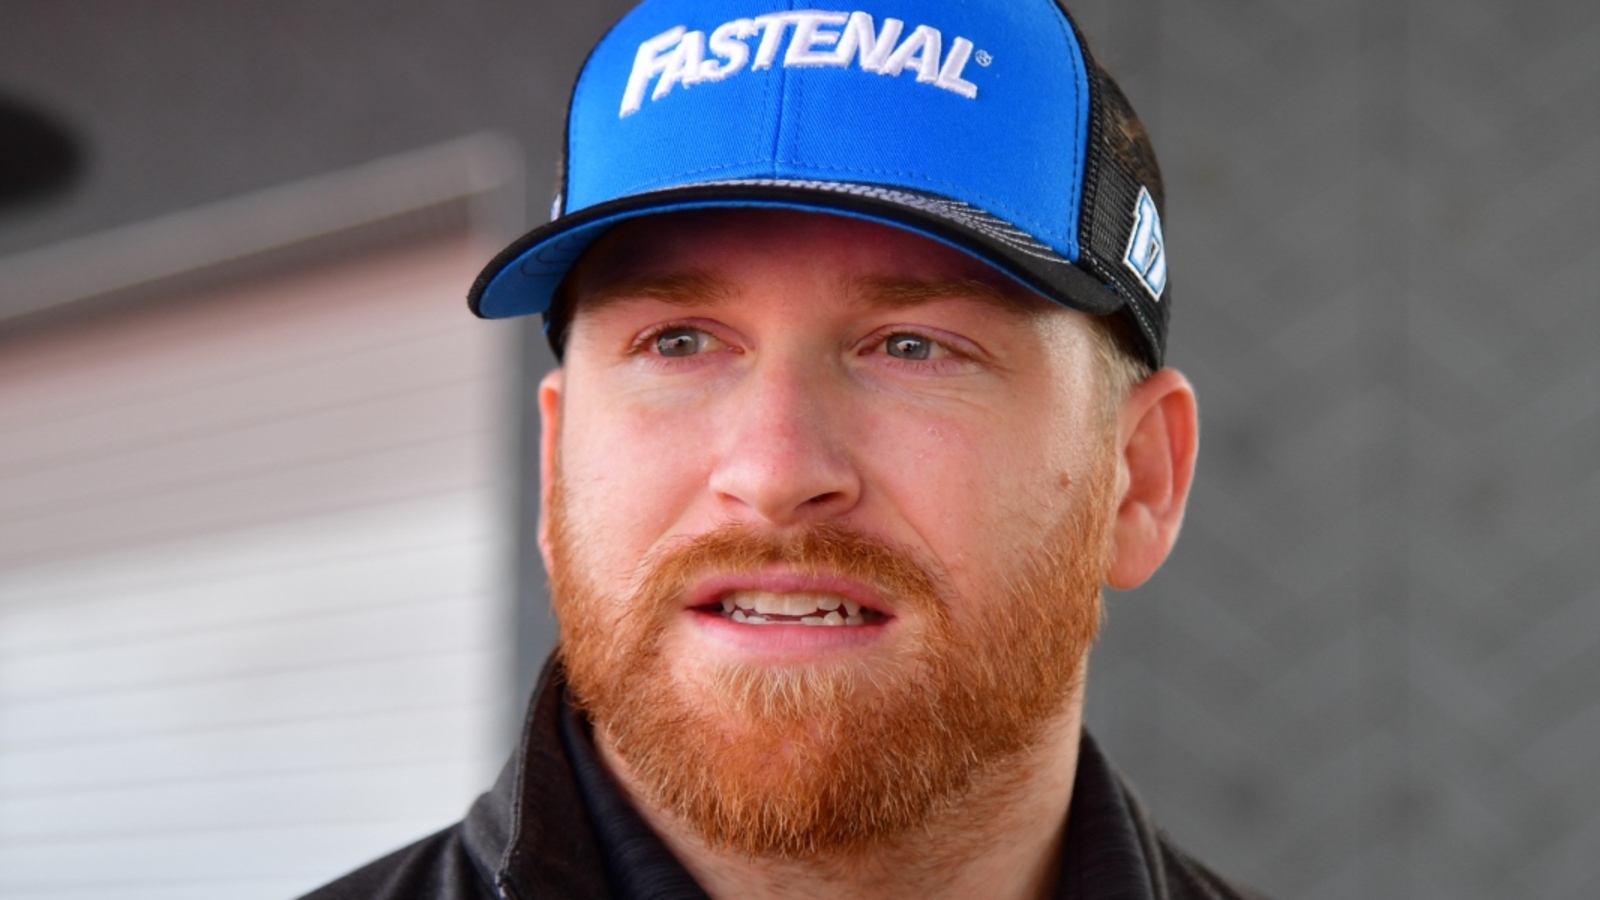 Chris Buescher's crew chief meets with NASCAR officials after photo finish with Kyle Larson, accepts race outcome